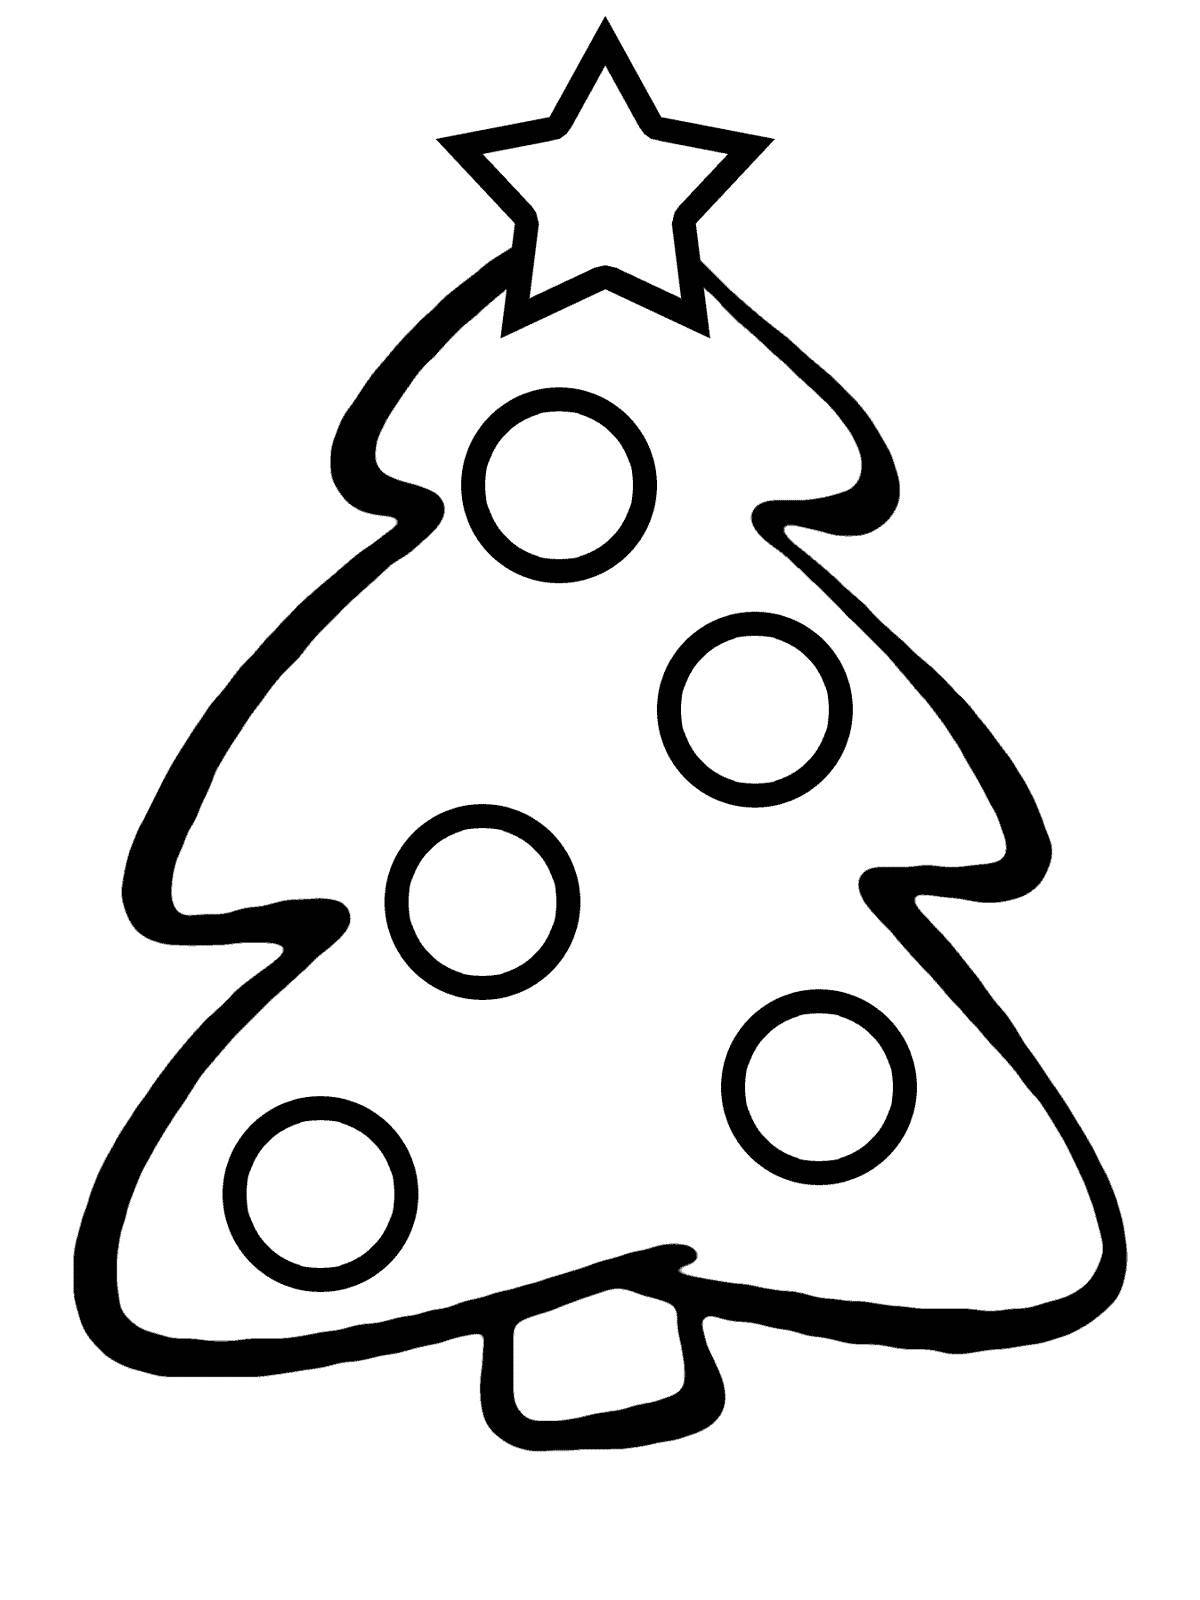 Live coloring Christmas tree for kids 2-3 years old